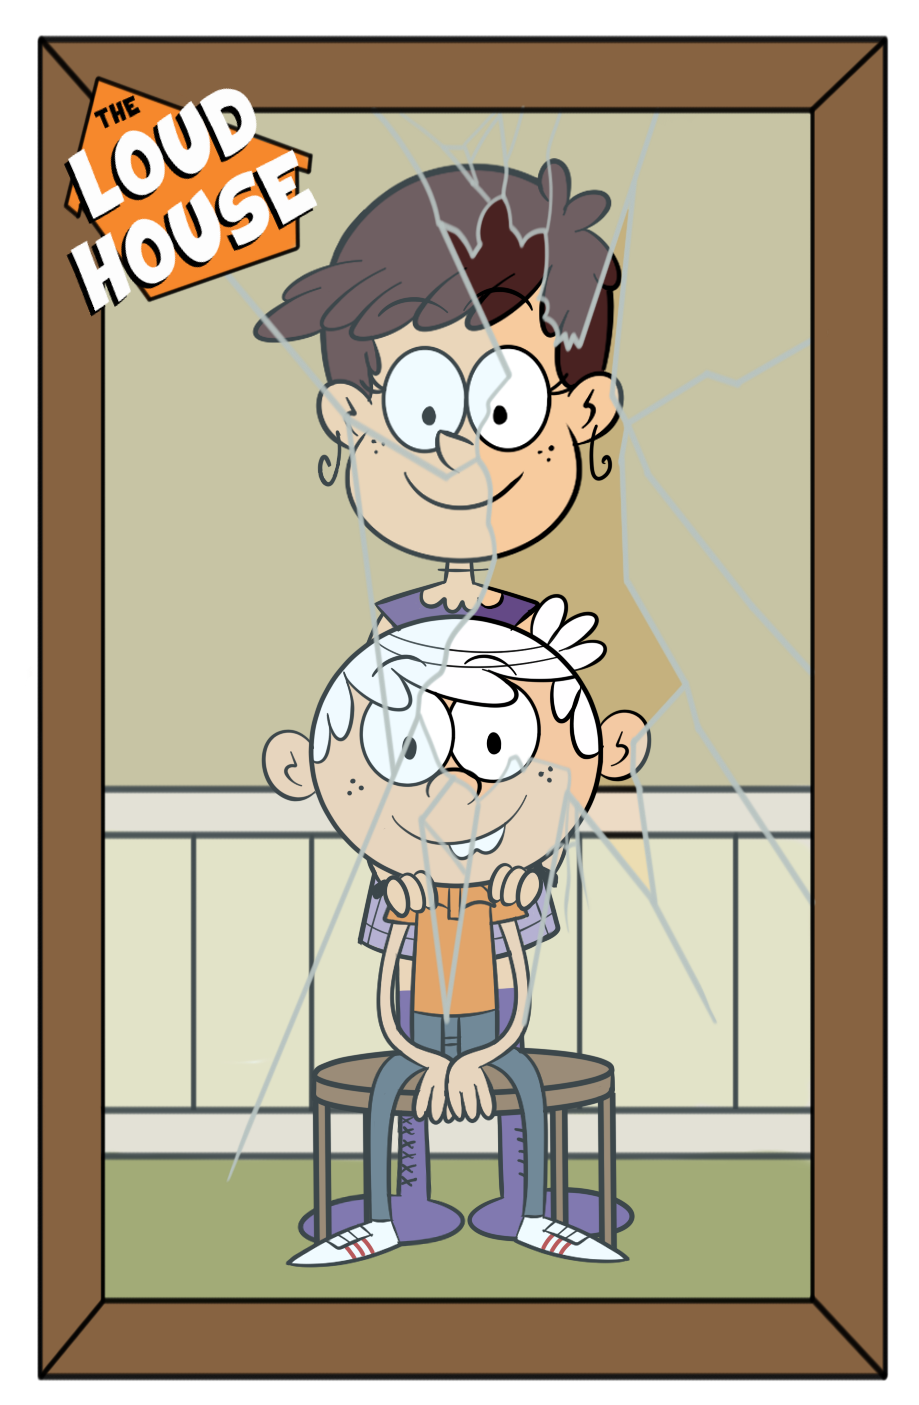 Why the fuck is the Loud House fanart always so dark? 